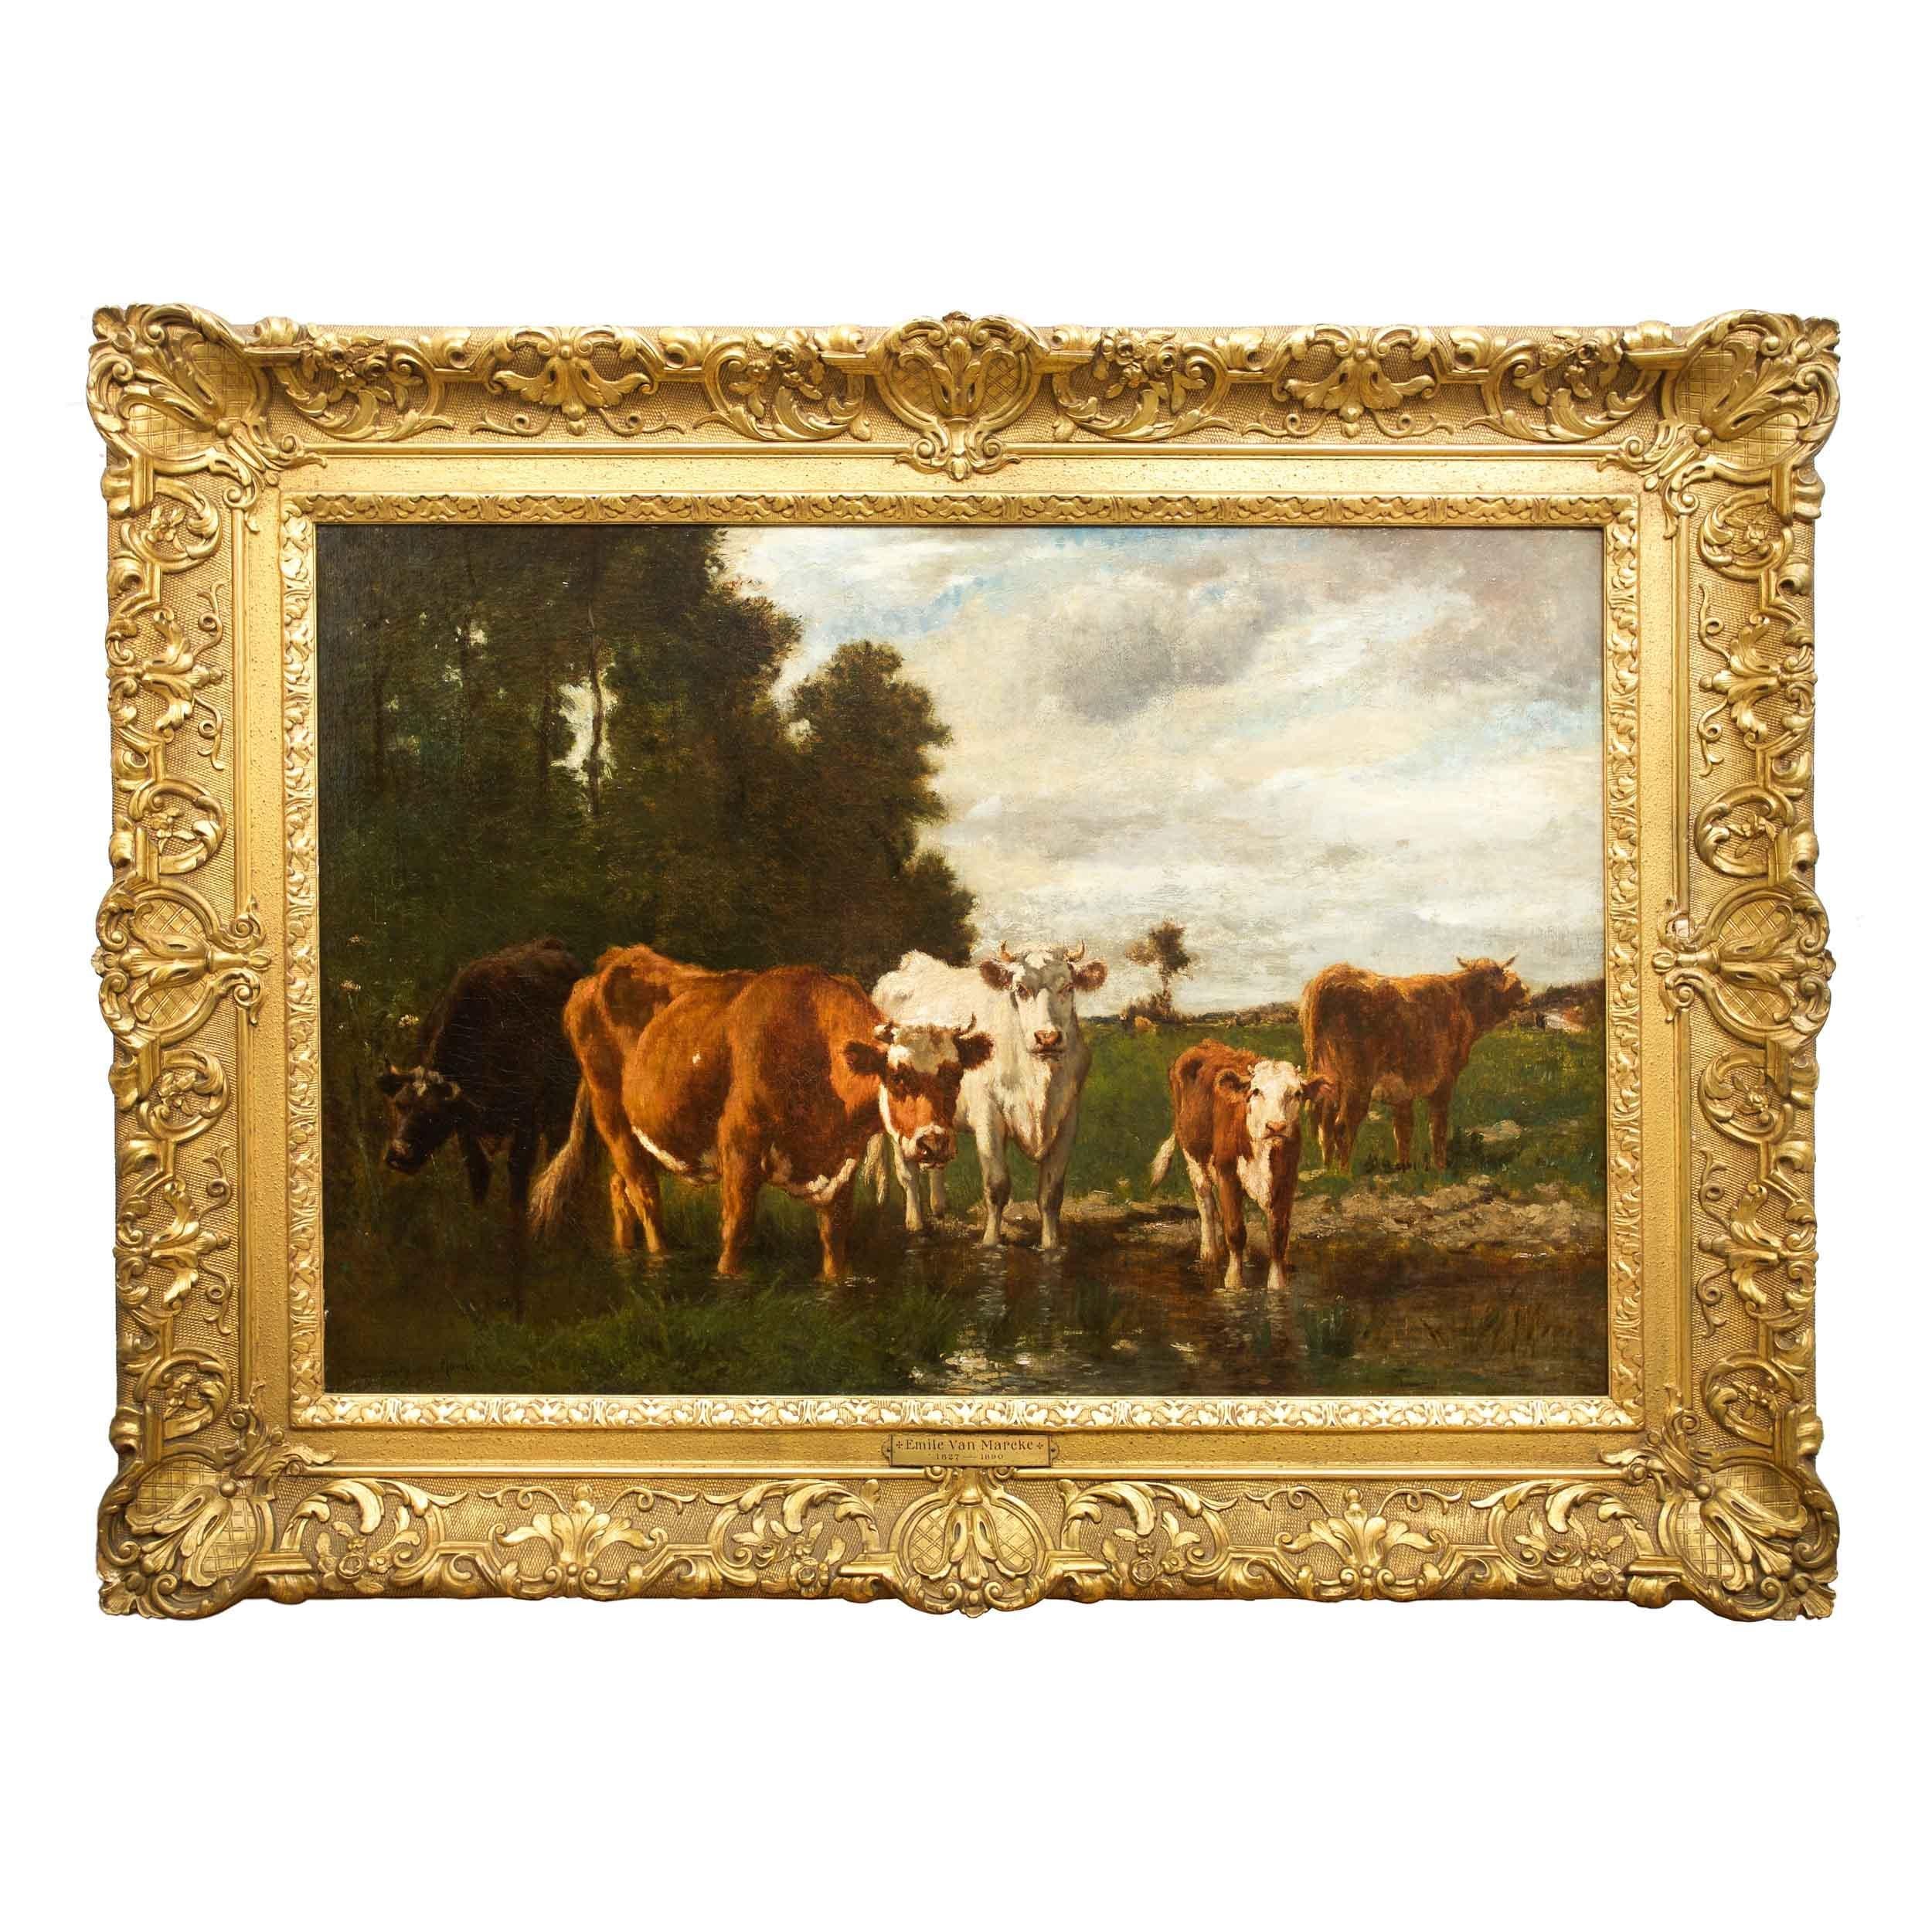 19th Century French Antique Barbizon Landscape Painting of Cattle by Emile van Marcke